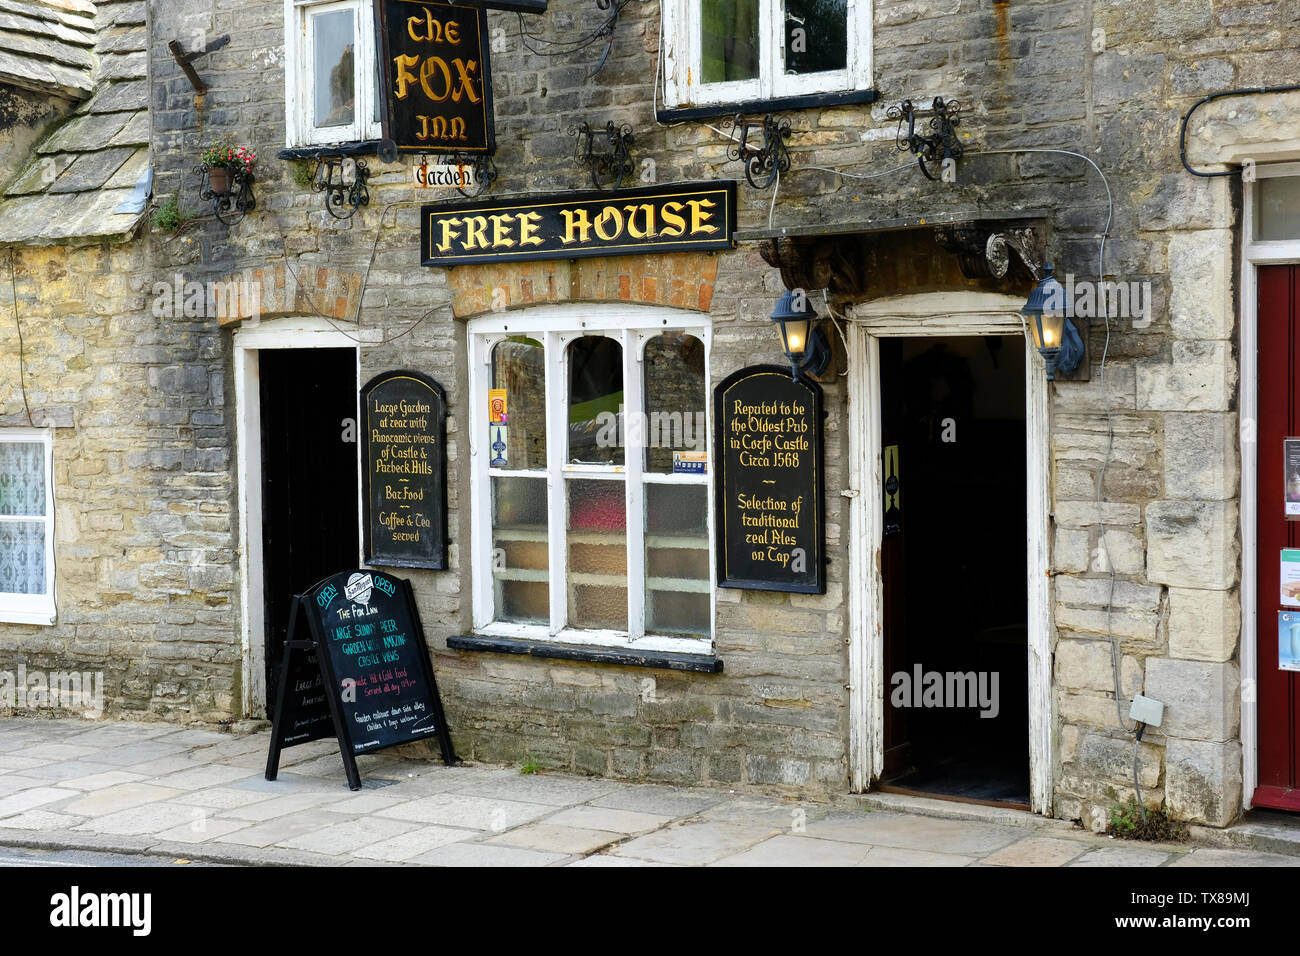 The Fox Inn, supposed to be the oldest pub in Corfe Castle, Dorset, UK - John Gollop Stock Photo